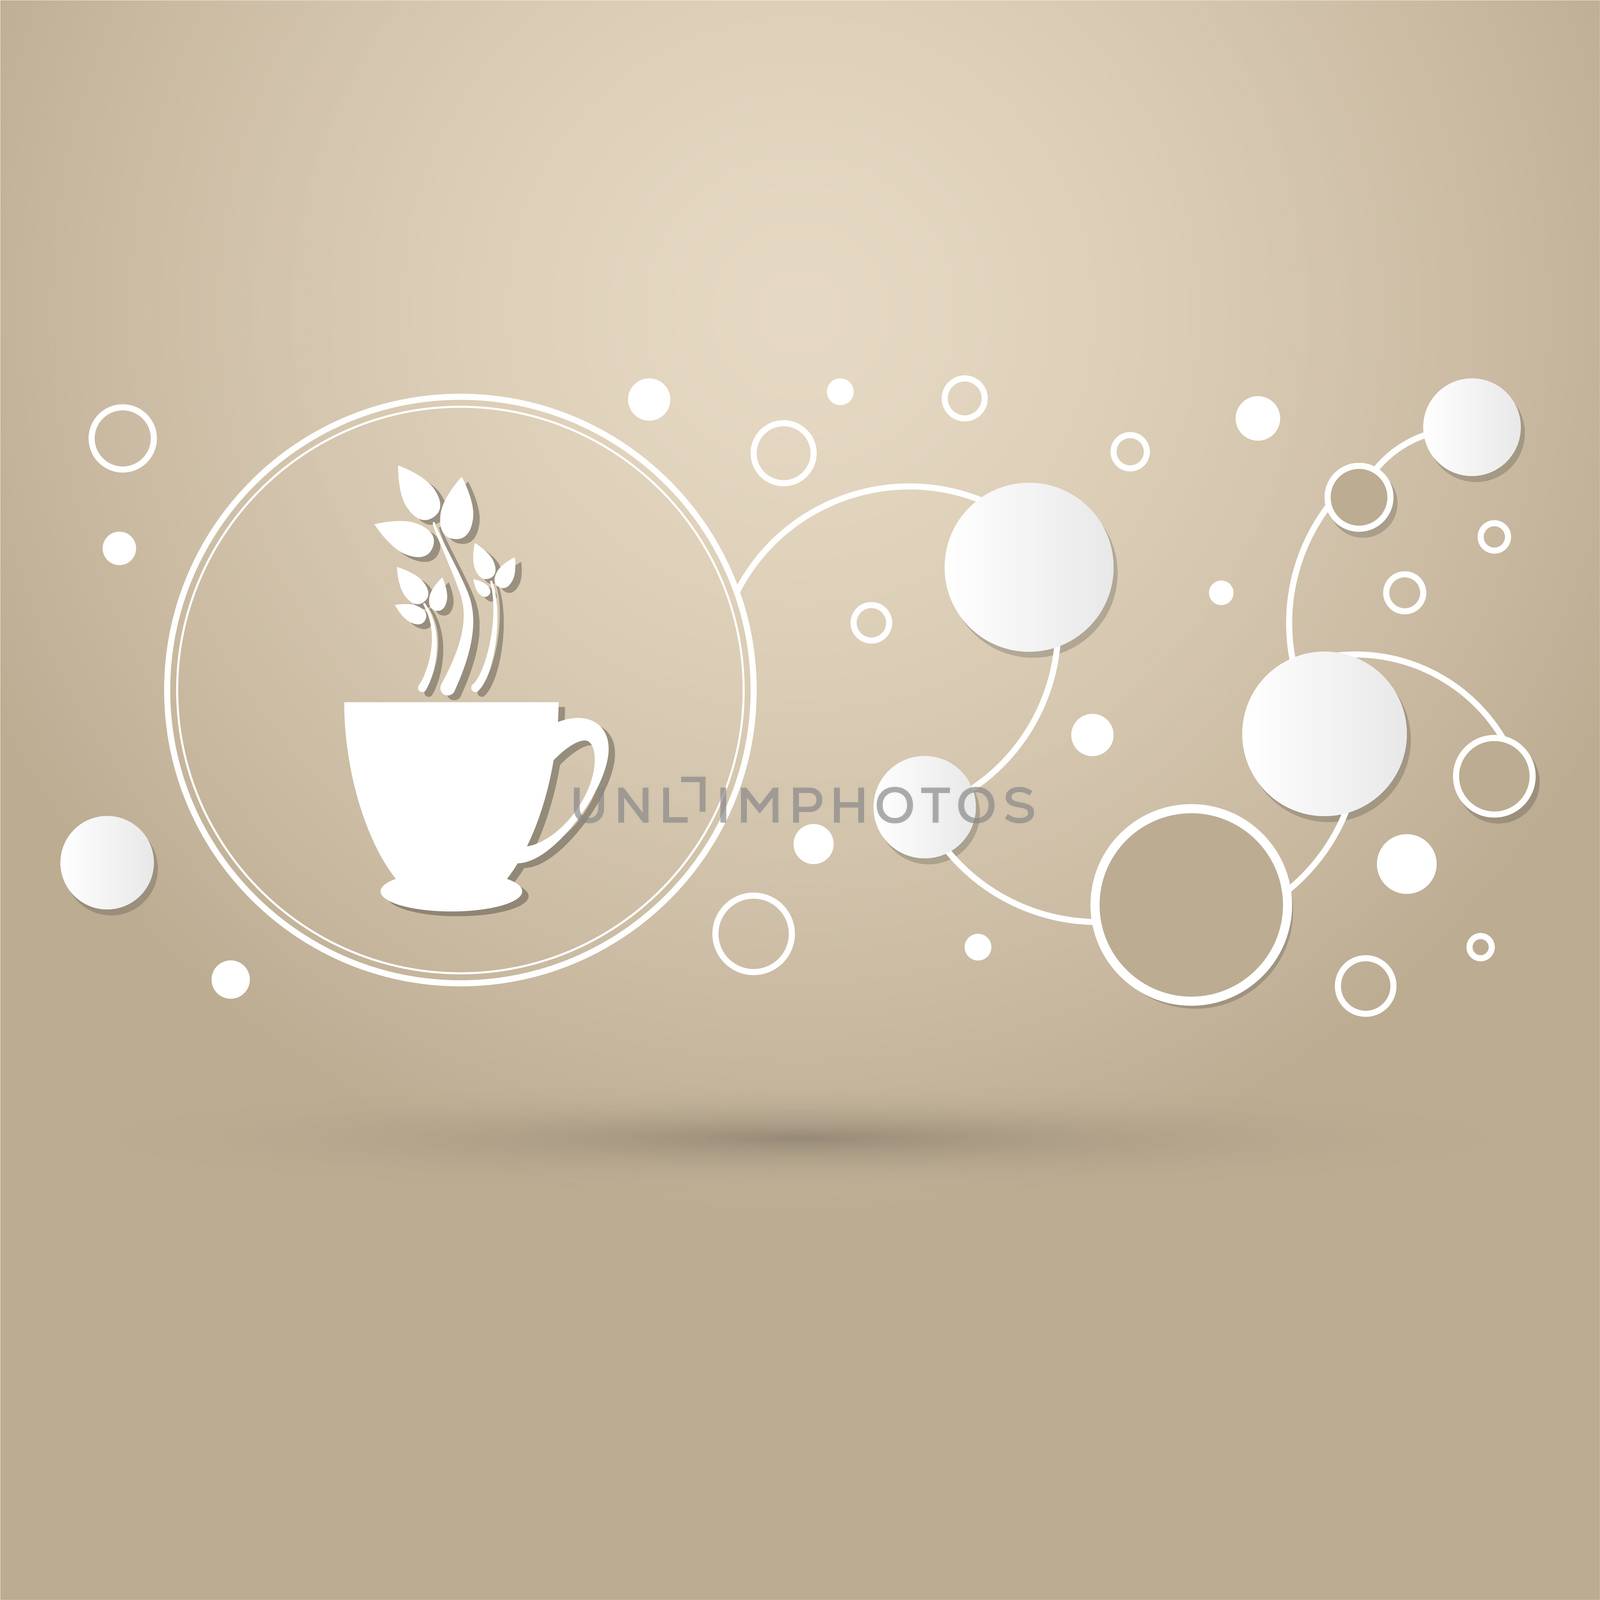 green tea icon on a brown background with elegant style and modern design infographic.  by Adamchuk